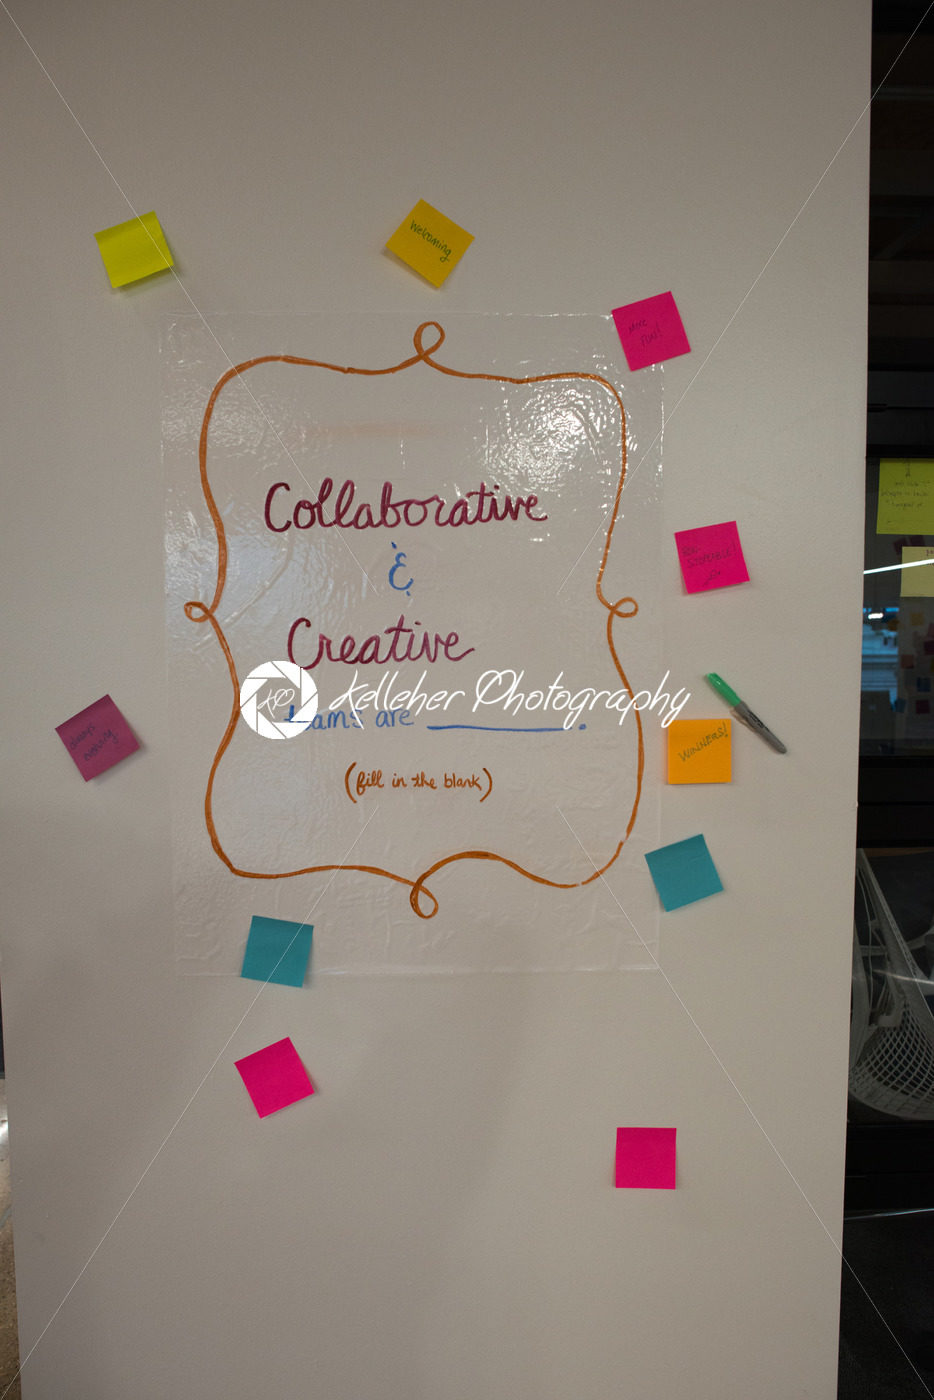 Sign on office wall, collaborative and creative teams are - Kelleher Photography Store